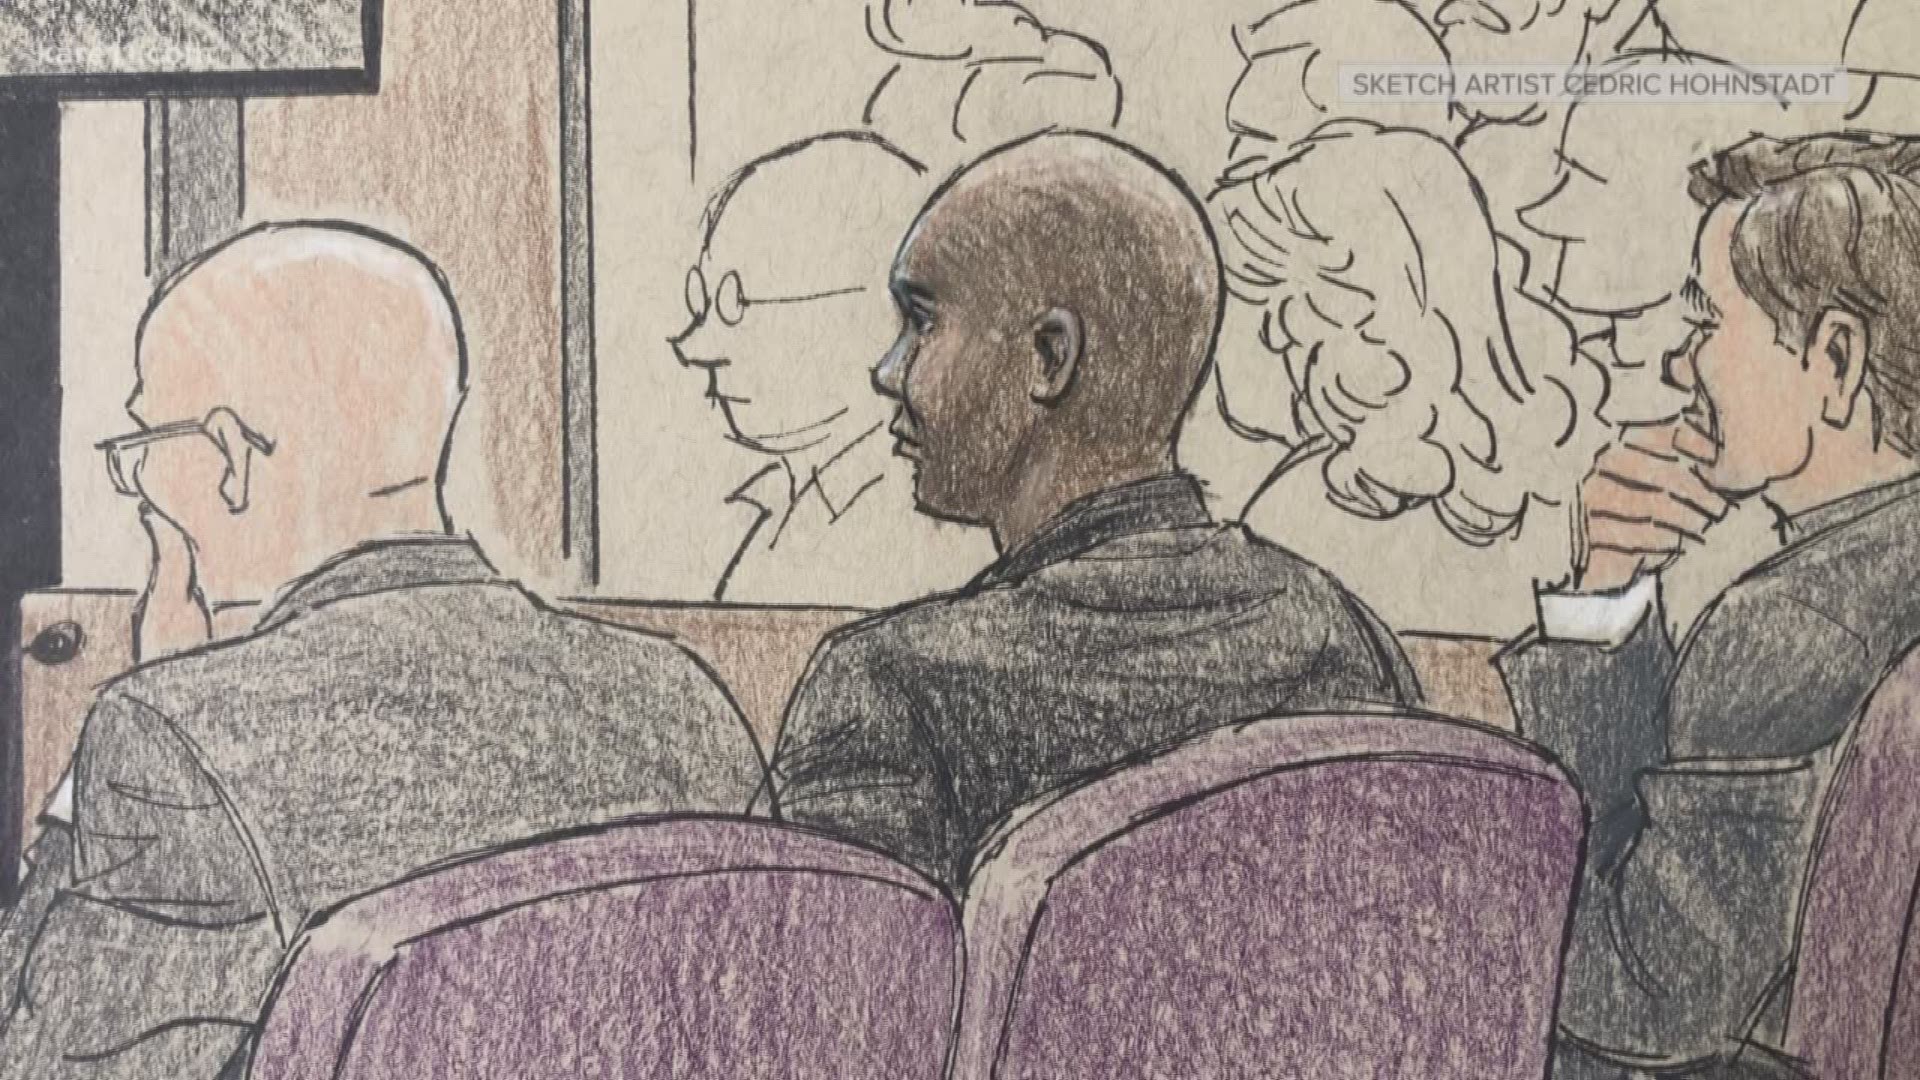 Where the Mohamed Noor case goes next... and insight into whether an appeal would be successful.